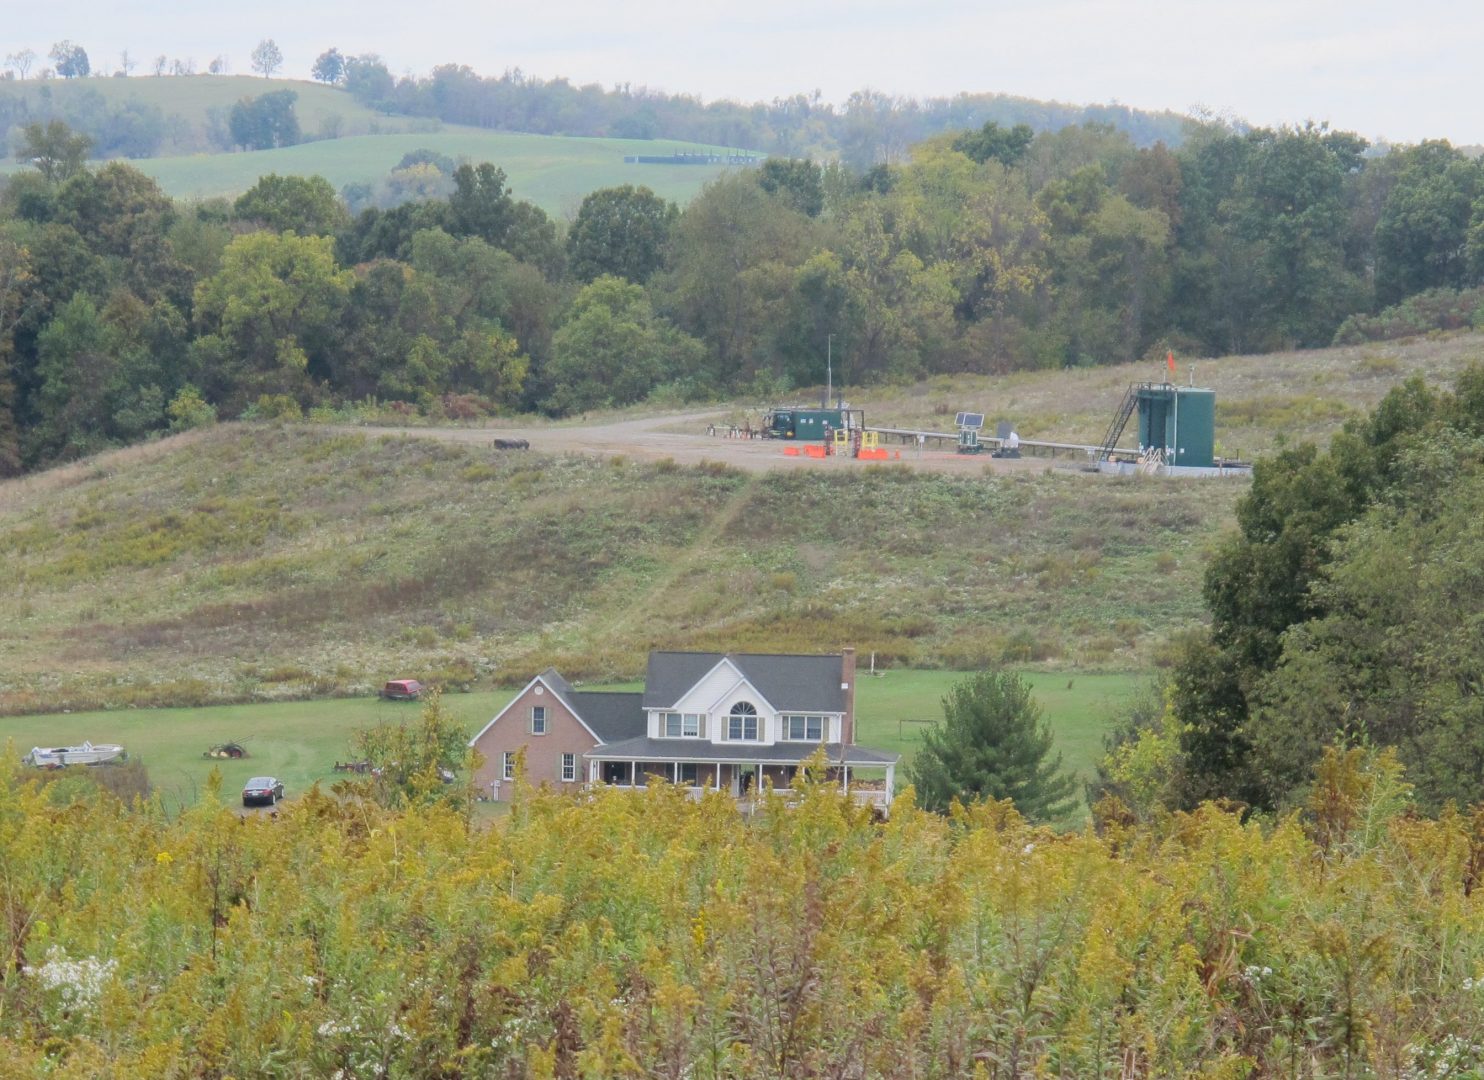 The Latkanich residence in Washington County with permanent well pad and natural gas infrastructure.